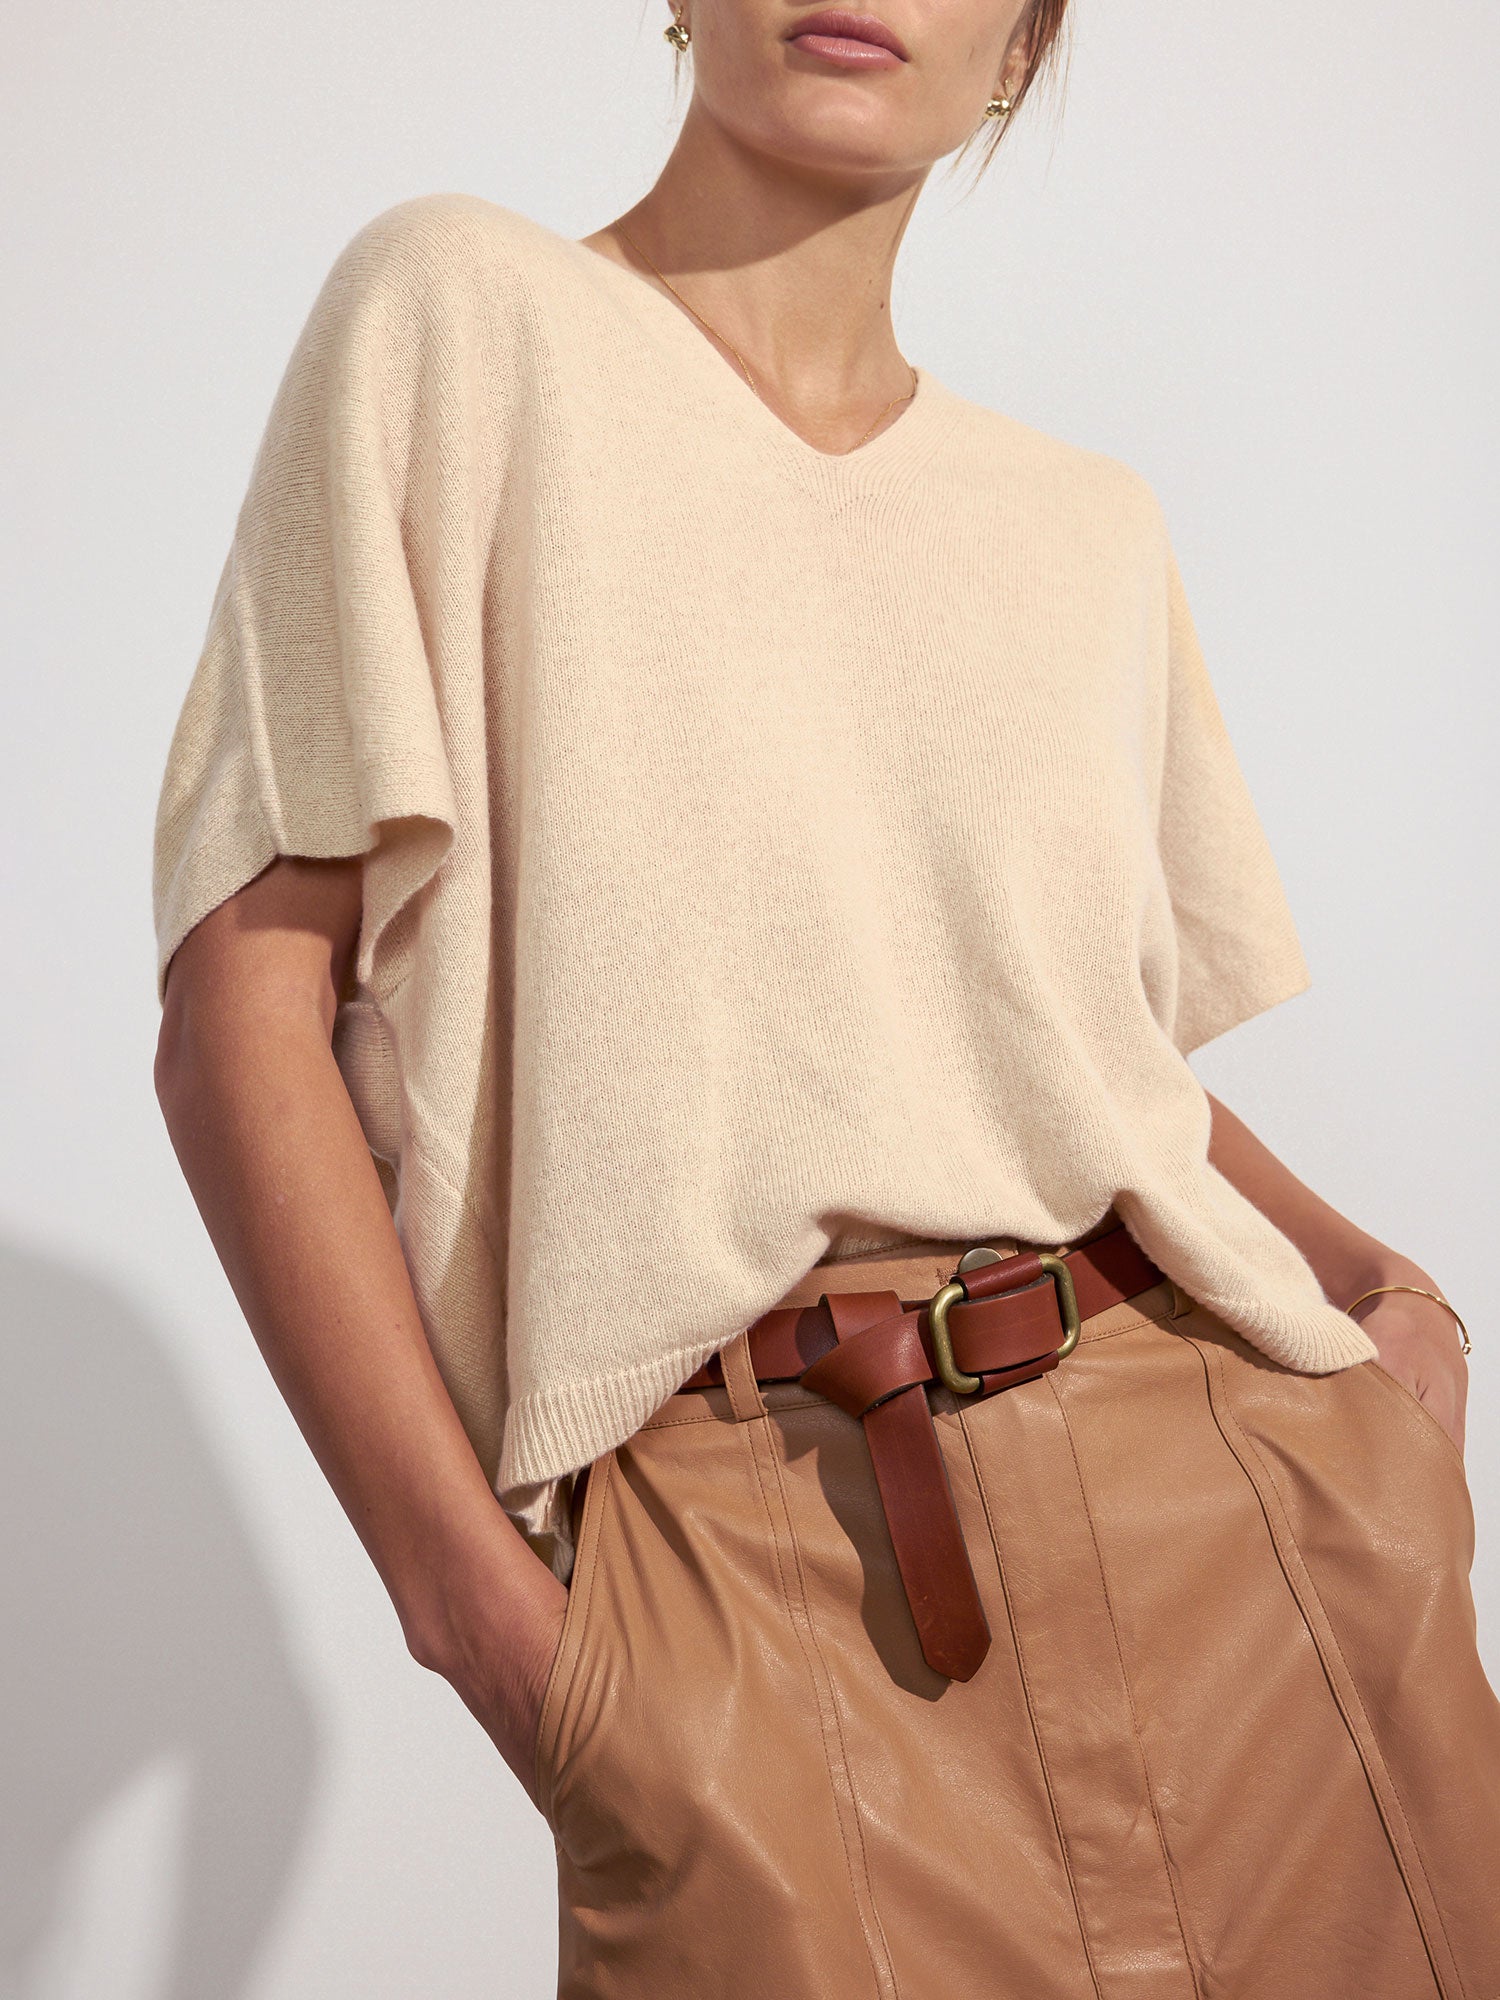 Ophi cashmere tan V-neck t-shirt top front view 2